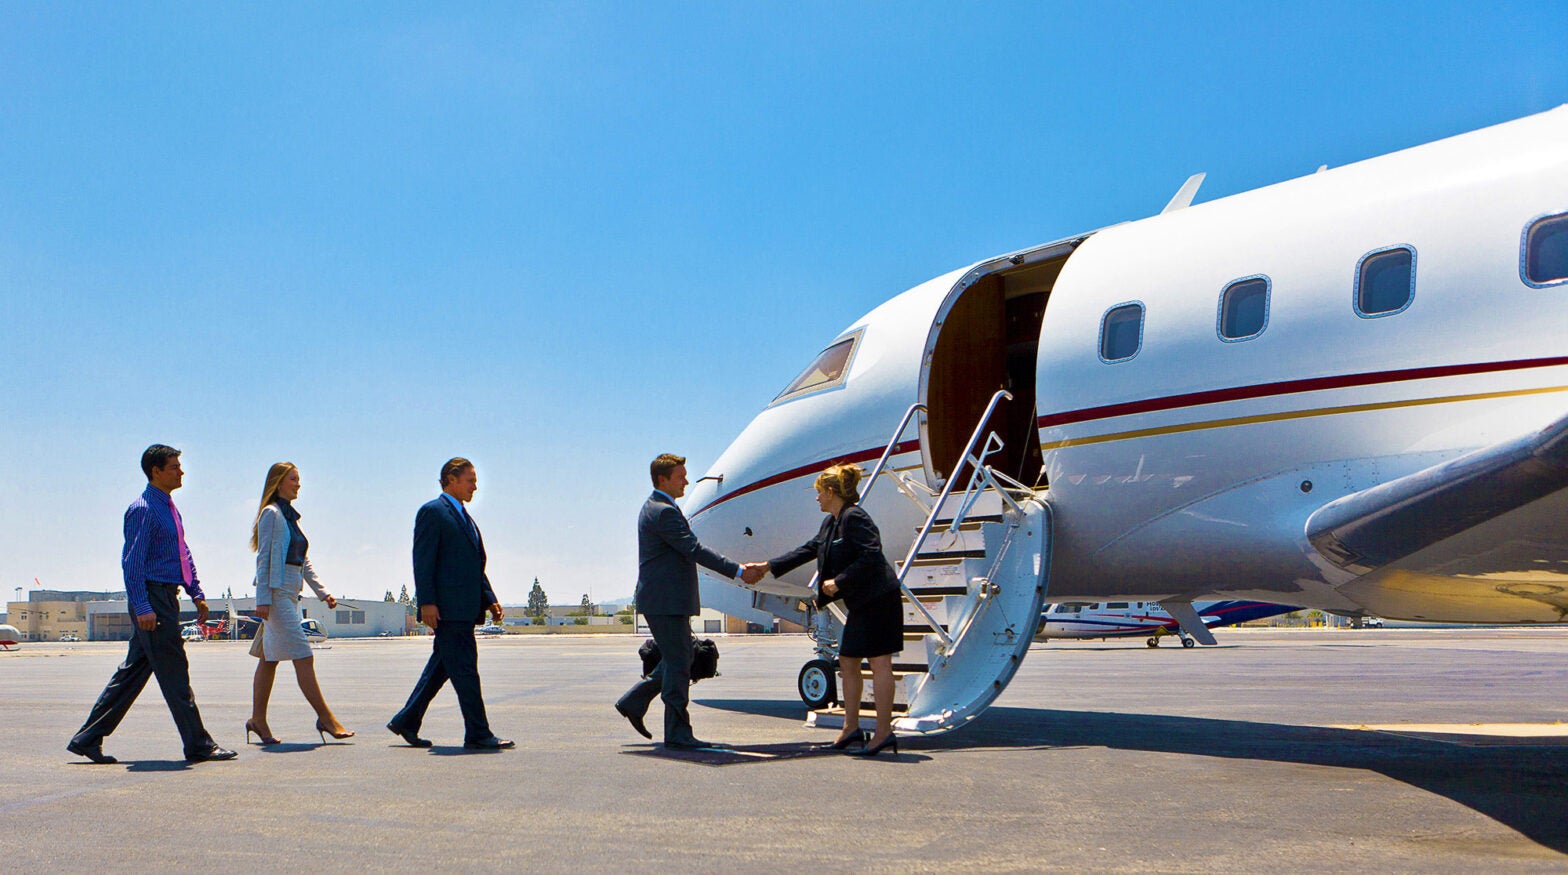 Business Aviation Groups Form Alliance to Push Back on Illegal Charters